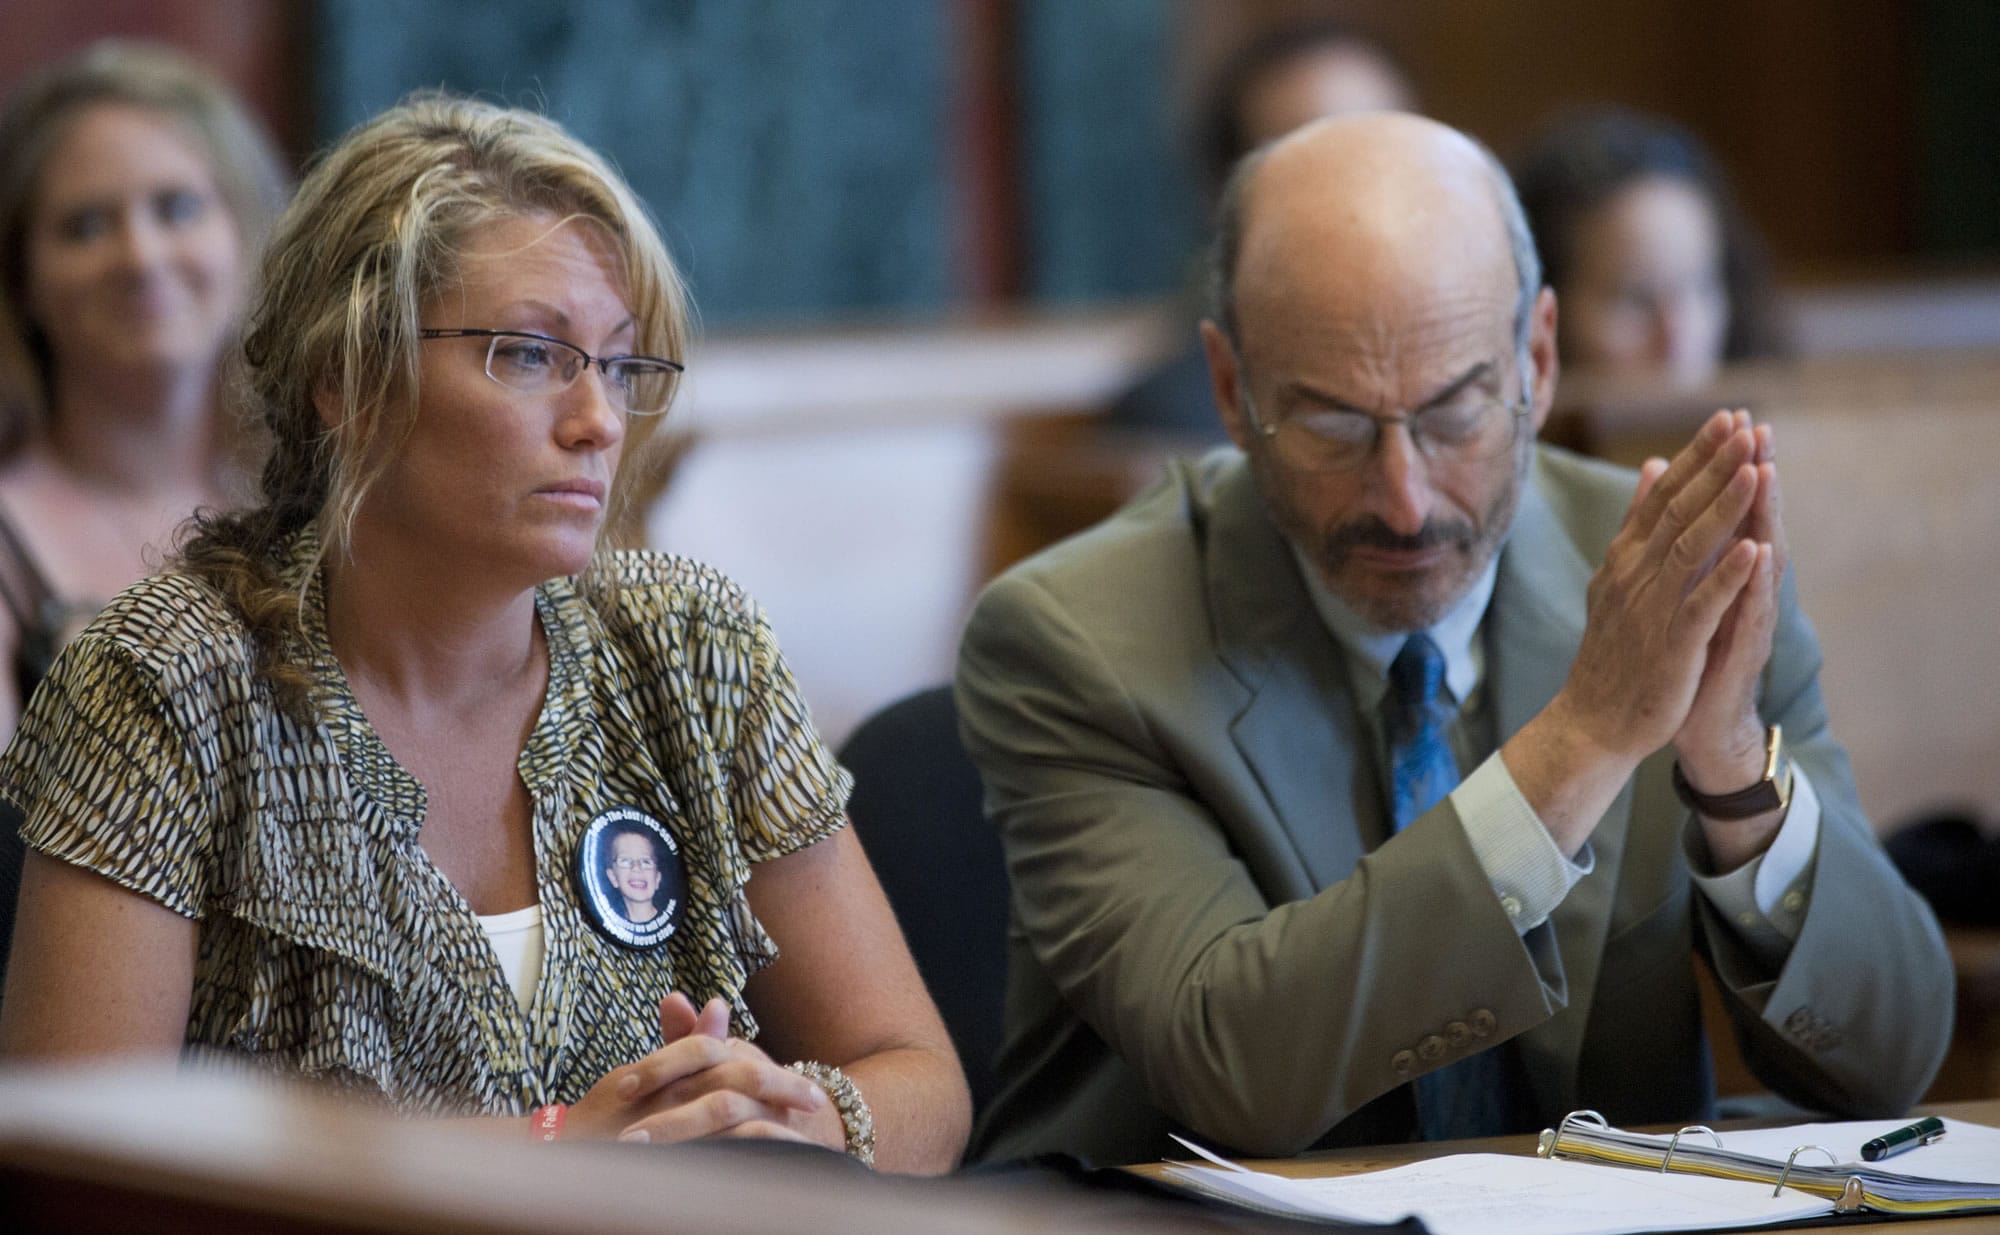 Desiree Young, along with her attorney, Elden Rosenthal listen to Peter Bunch, Teri Horman's lawyer,  present reasons for delaying Young's civil lawsuit in Multnomah County Court, Wednesday, Aug. 15, 2012 in Portland, Ore. Judge Henry Kantor said Wednesday the delay sought by Terri Horman, stepmother of Kyron Horman, wouldn't serve a purpose.